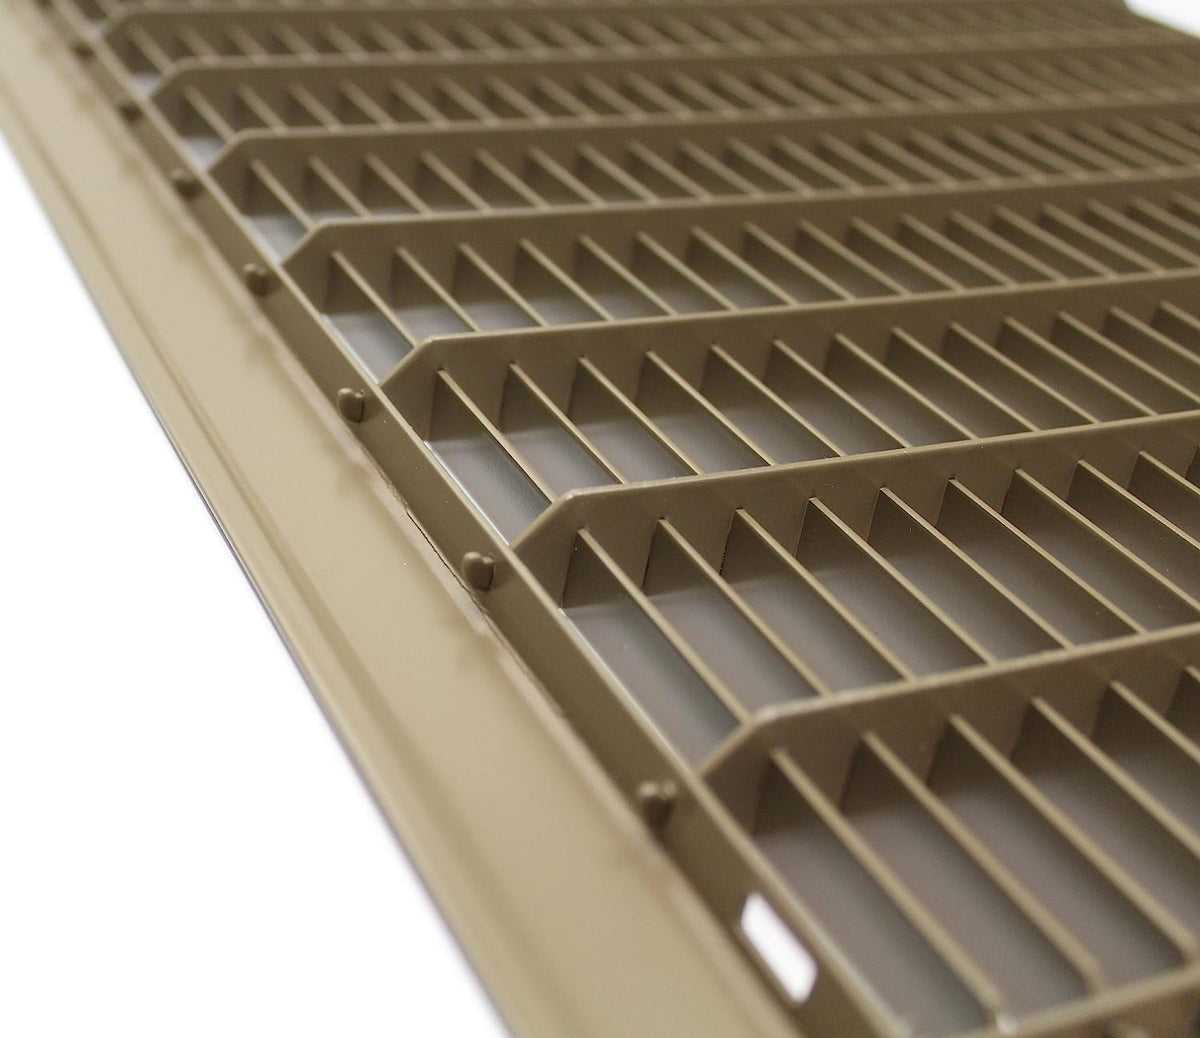 18&quot; X 36&quot; Or 36&quot; X 18&quot; Heavy Duty Floor Grille - Fixed Blades Air Grille - Brown [Outer Dimensions: 19.75 X 37.75]